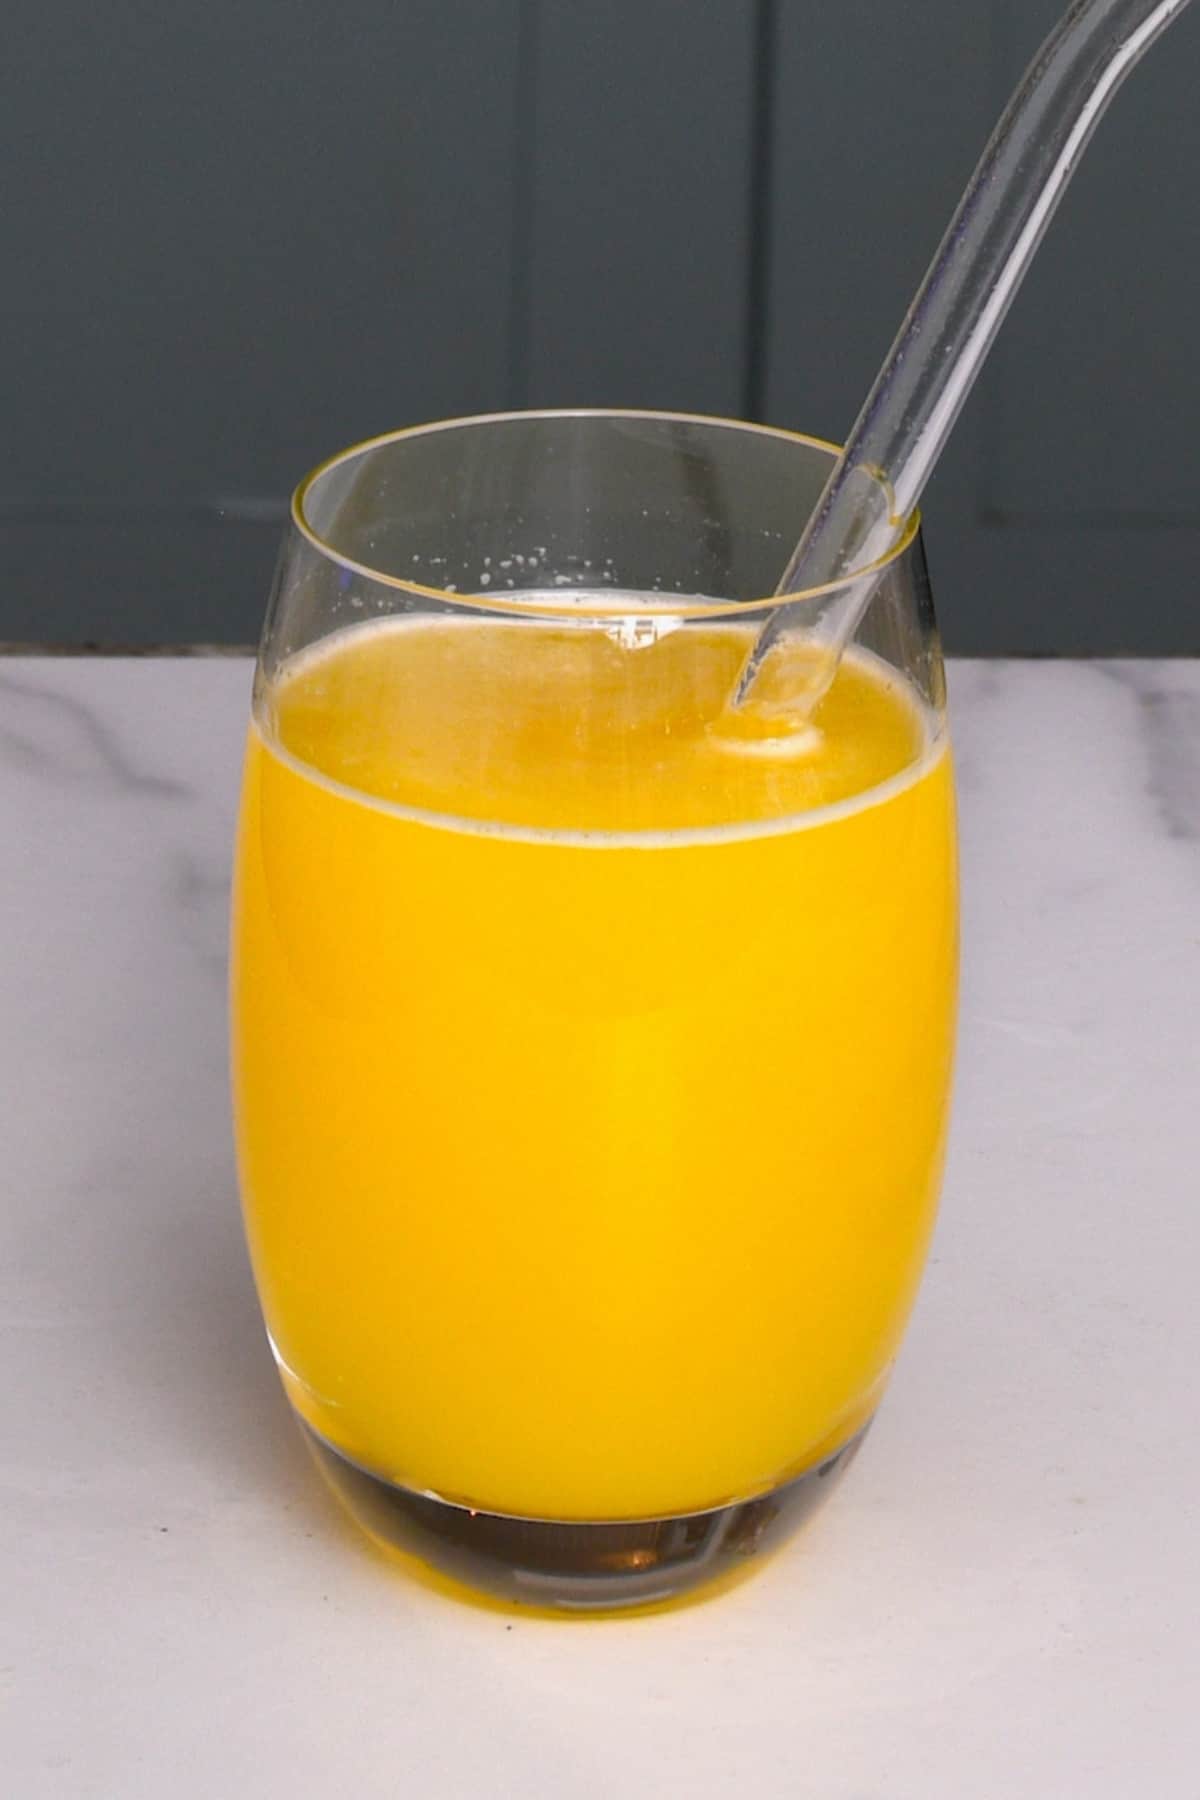 https://www.alphafoodie.com/wp-content/uploads/2022/02/How-to-Juice-a-Pineapple-Fresh-pineapple-juice-in-a-glass.jpeg